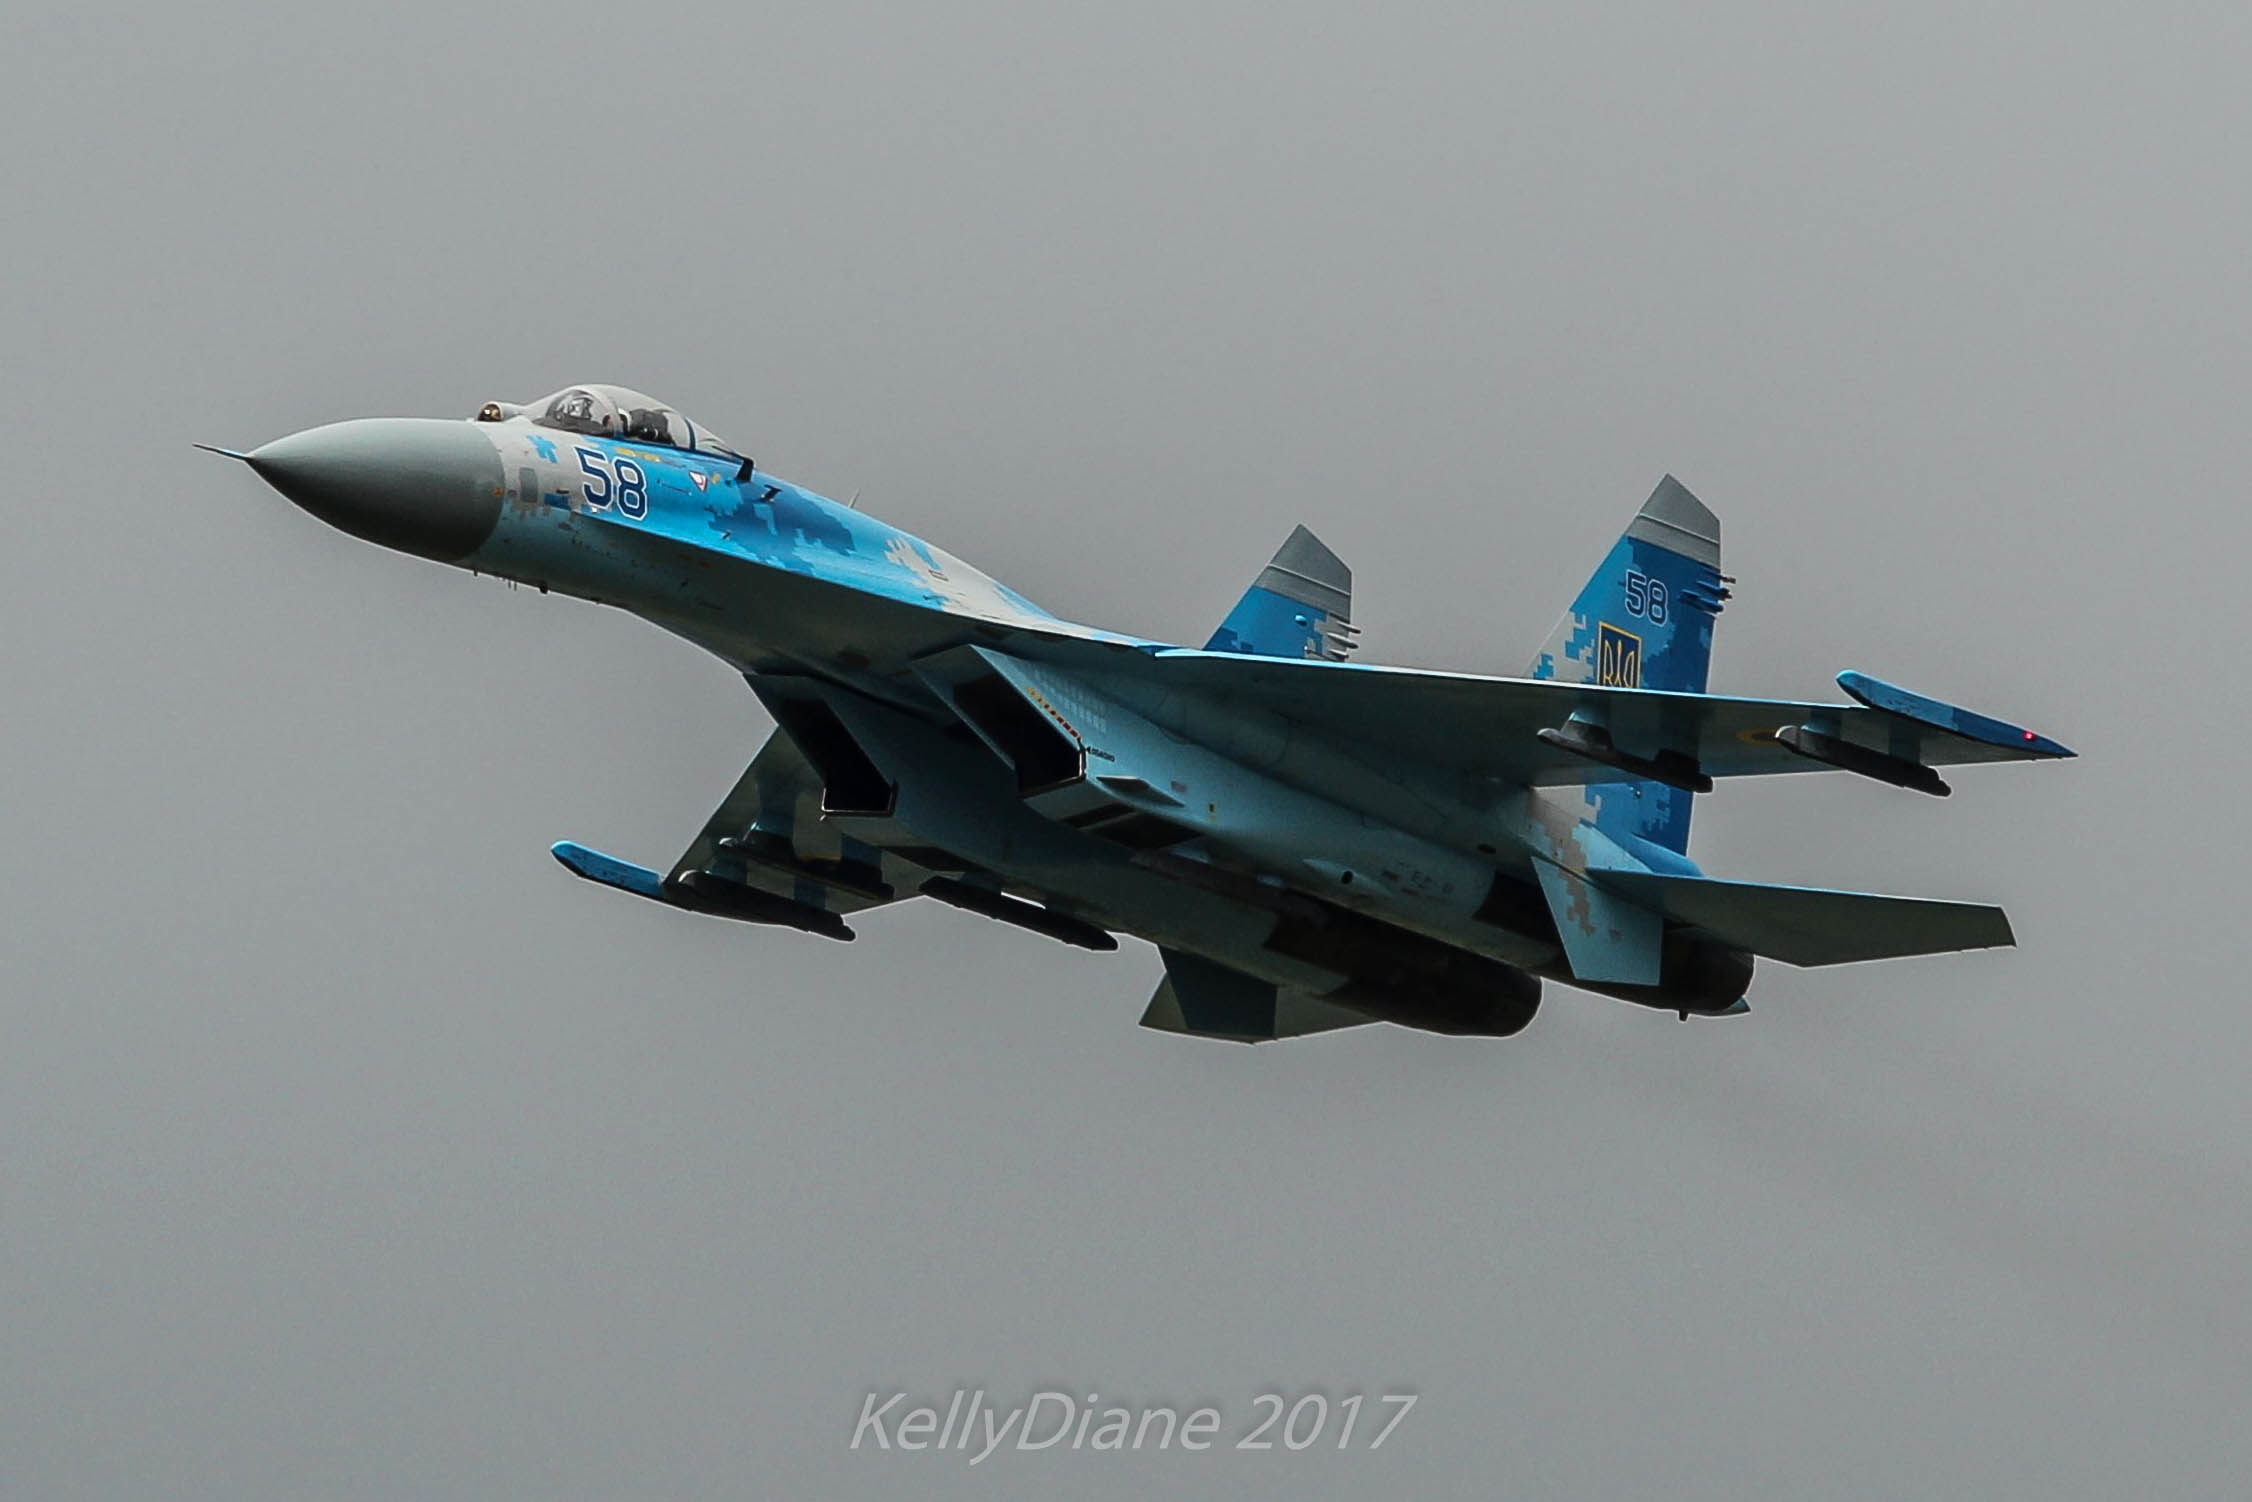 Aviation related image of a blue Ukrainian SU-27 Flanker taken at an airshow. A fact about me